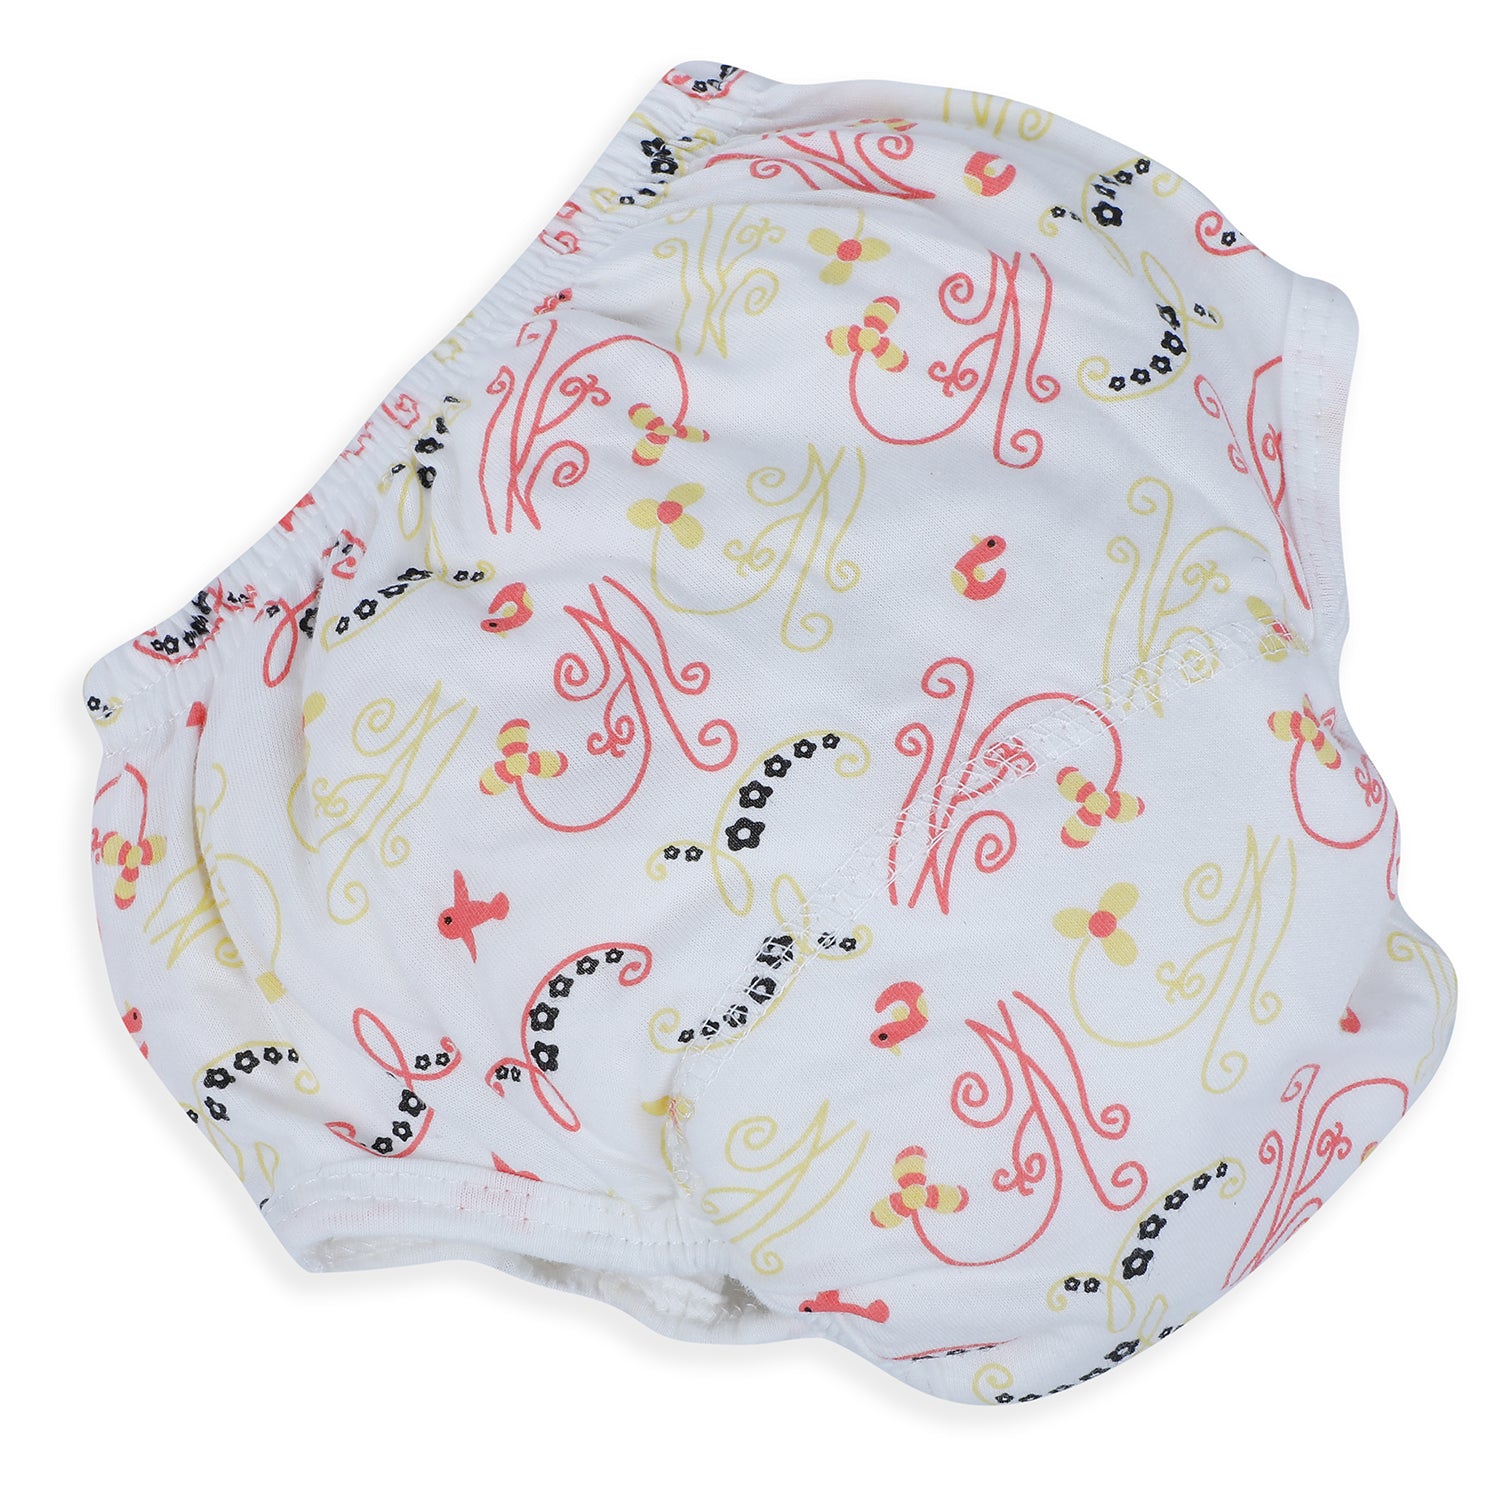 Adjustable & Washable Cloth Diaper Panty 2 Pk Abstract Multicolour